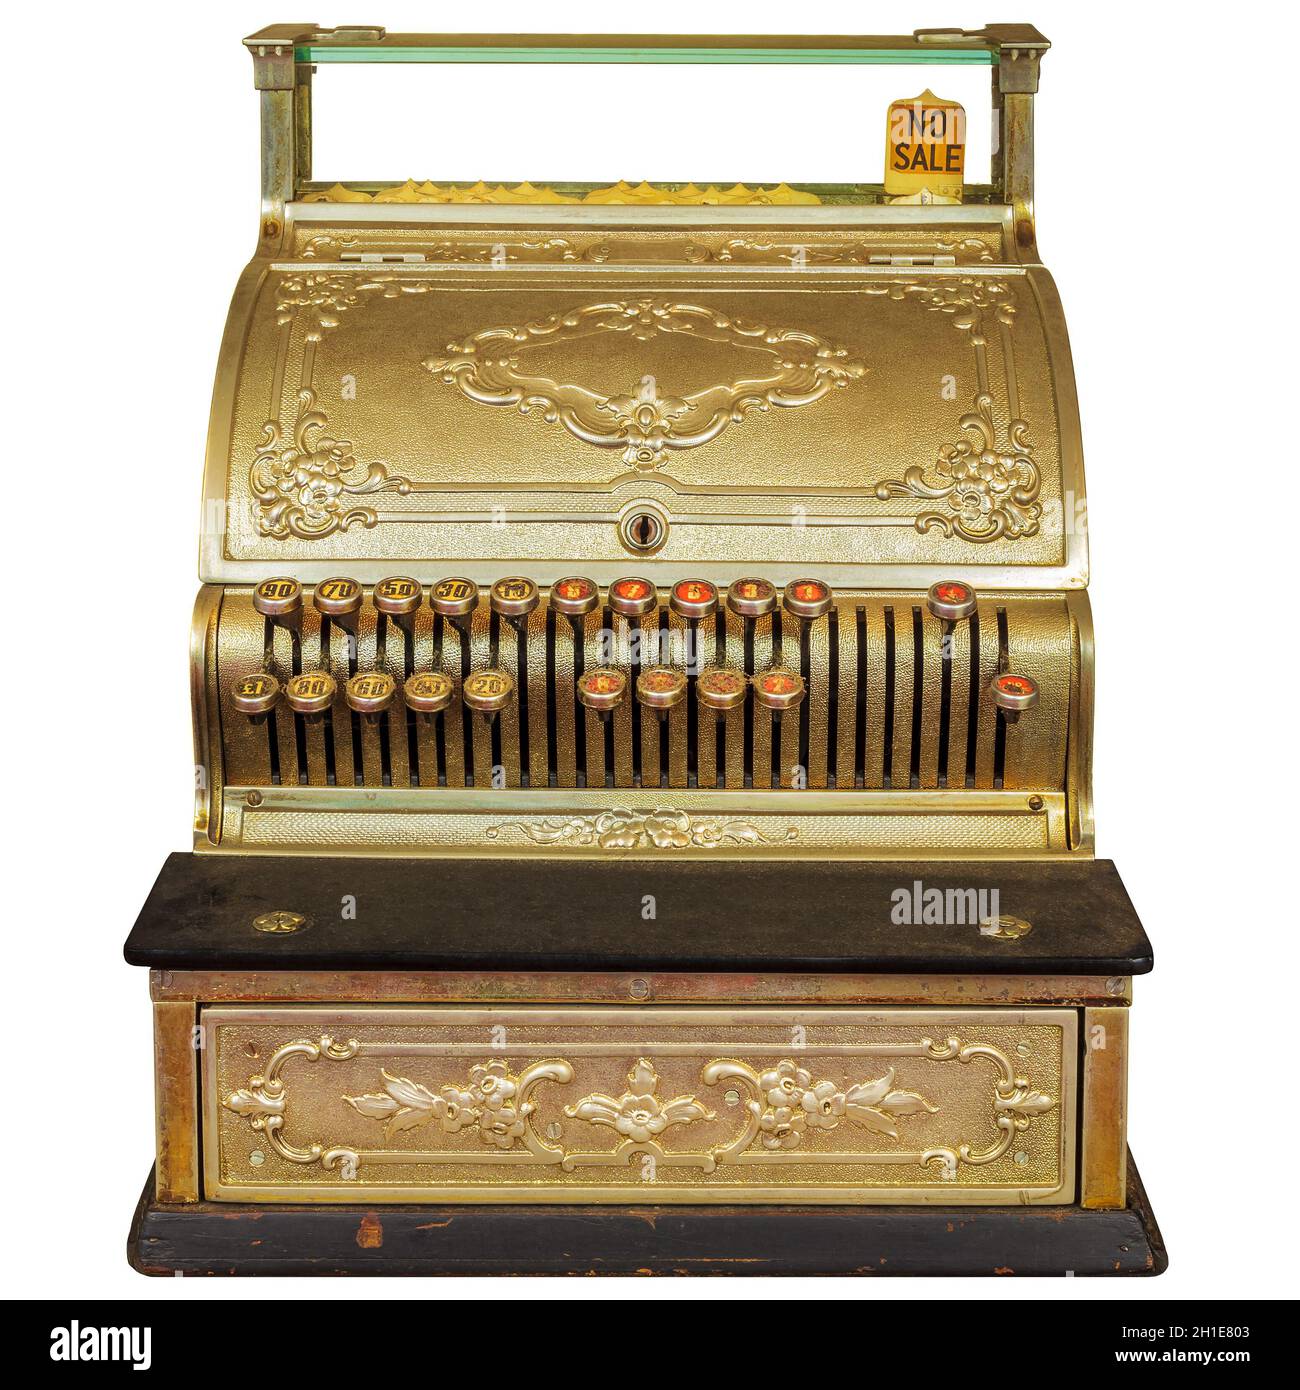 Vintage ornamental cash register isolated on a white background Stock Photo